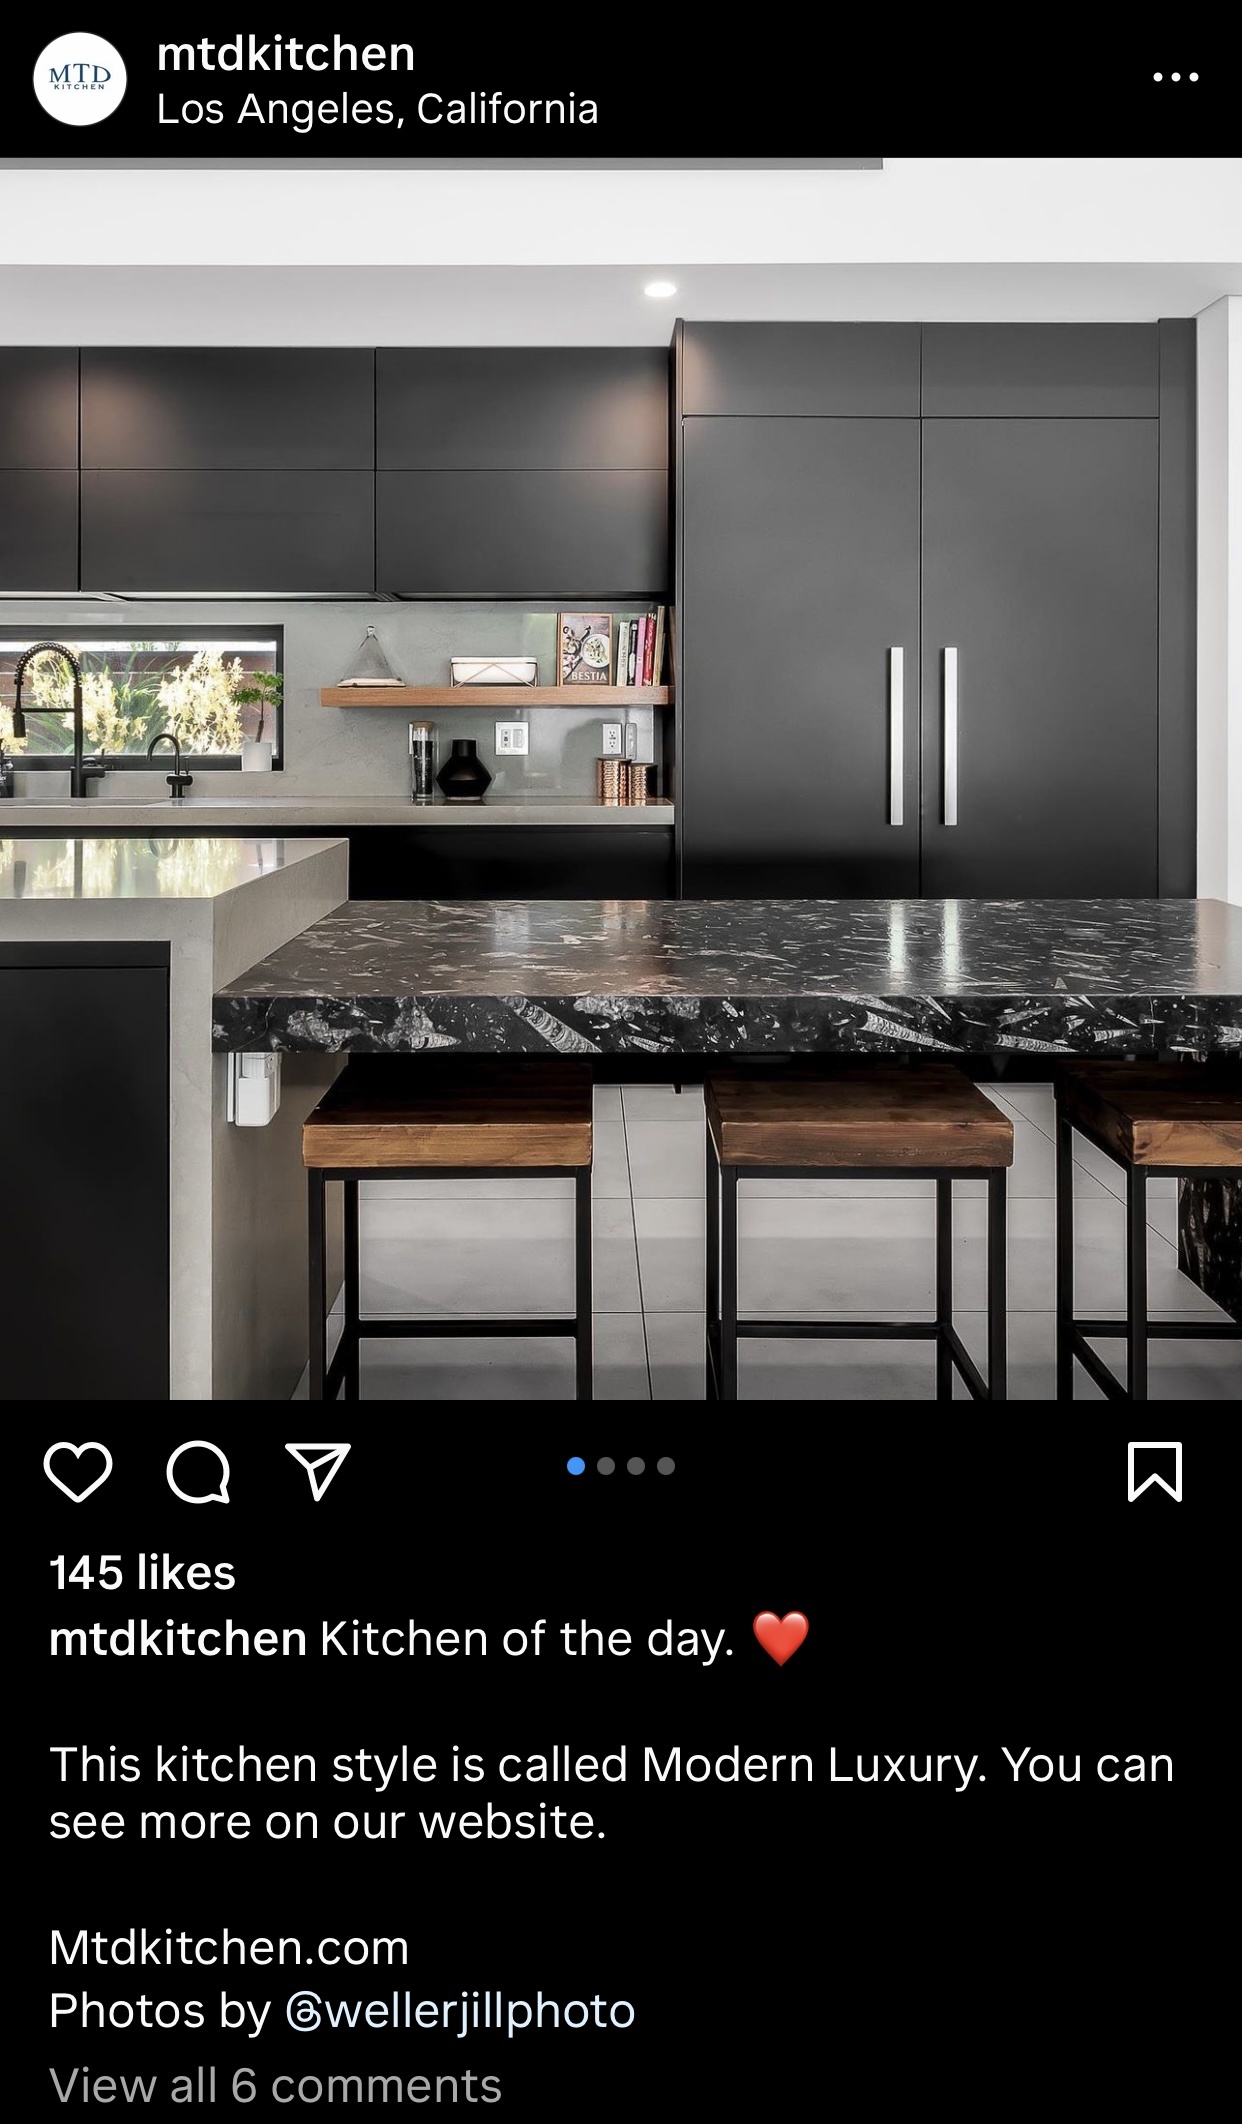 Social Media Management and Marketing Direction for MTD Kitchen by Paris Nasseri